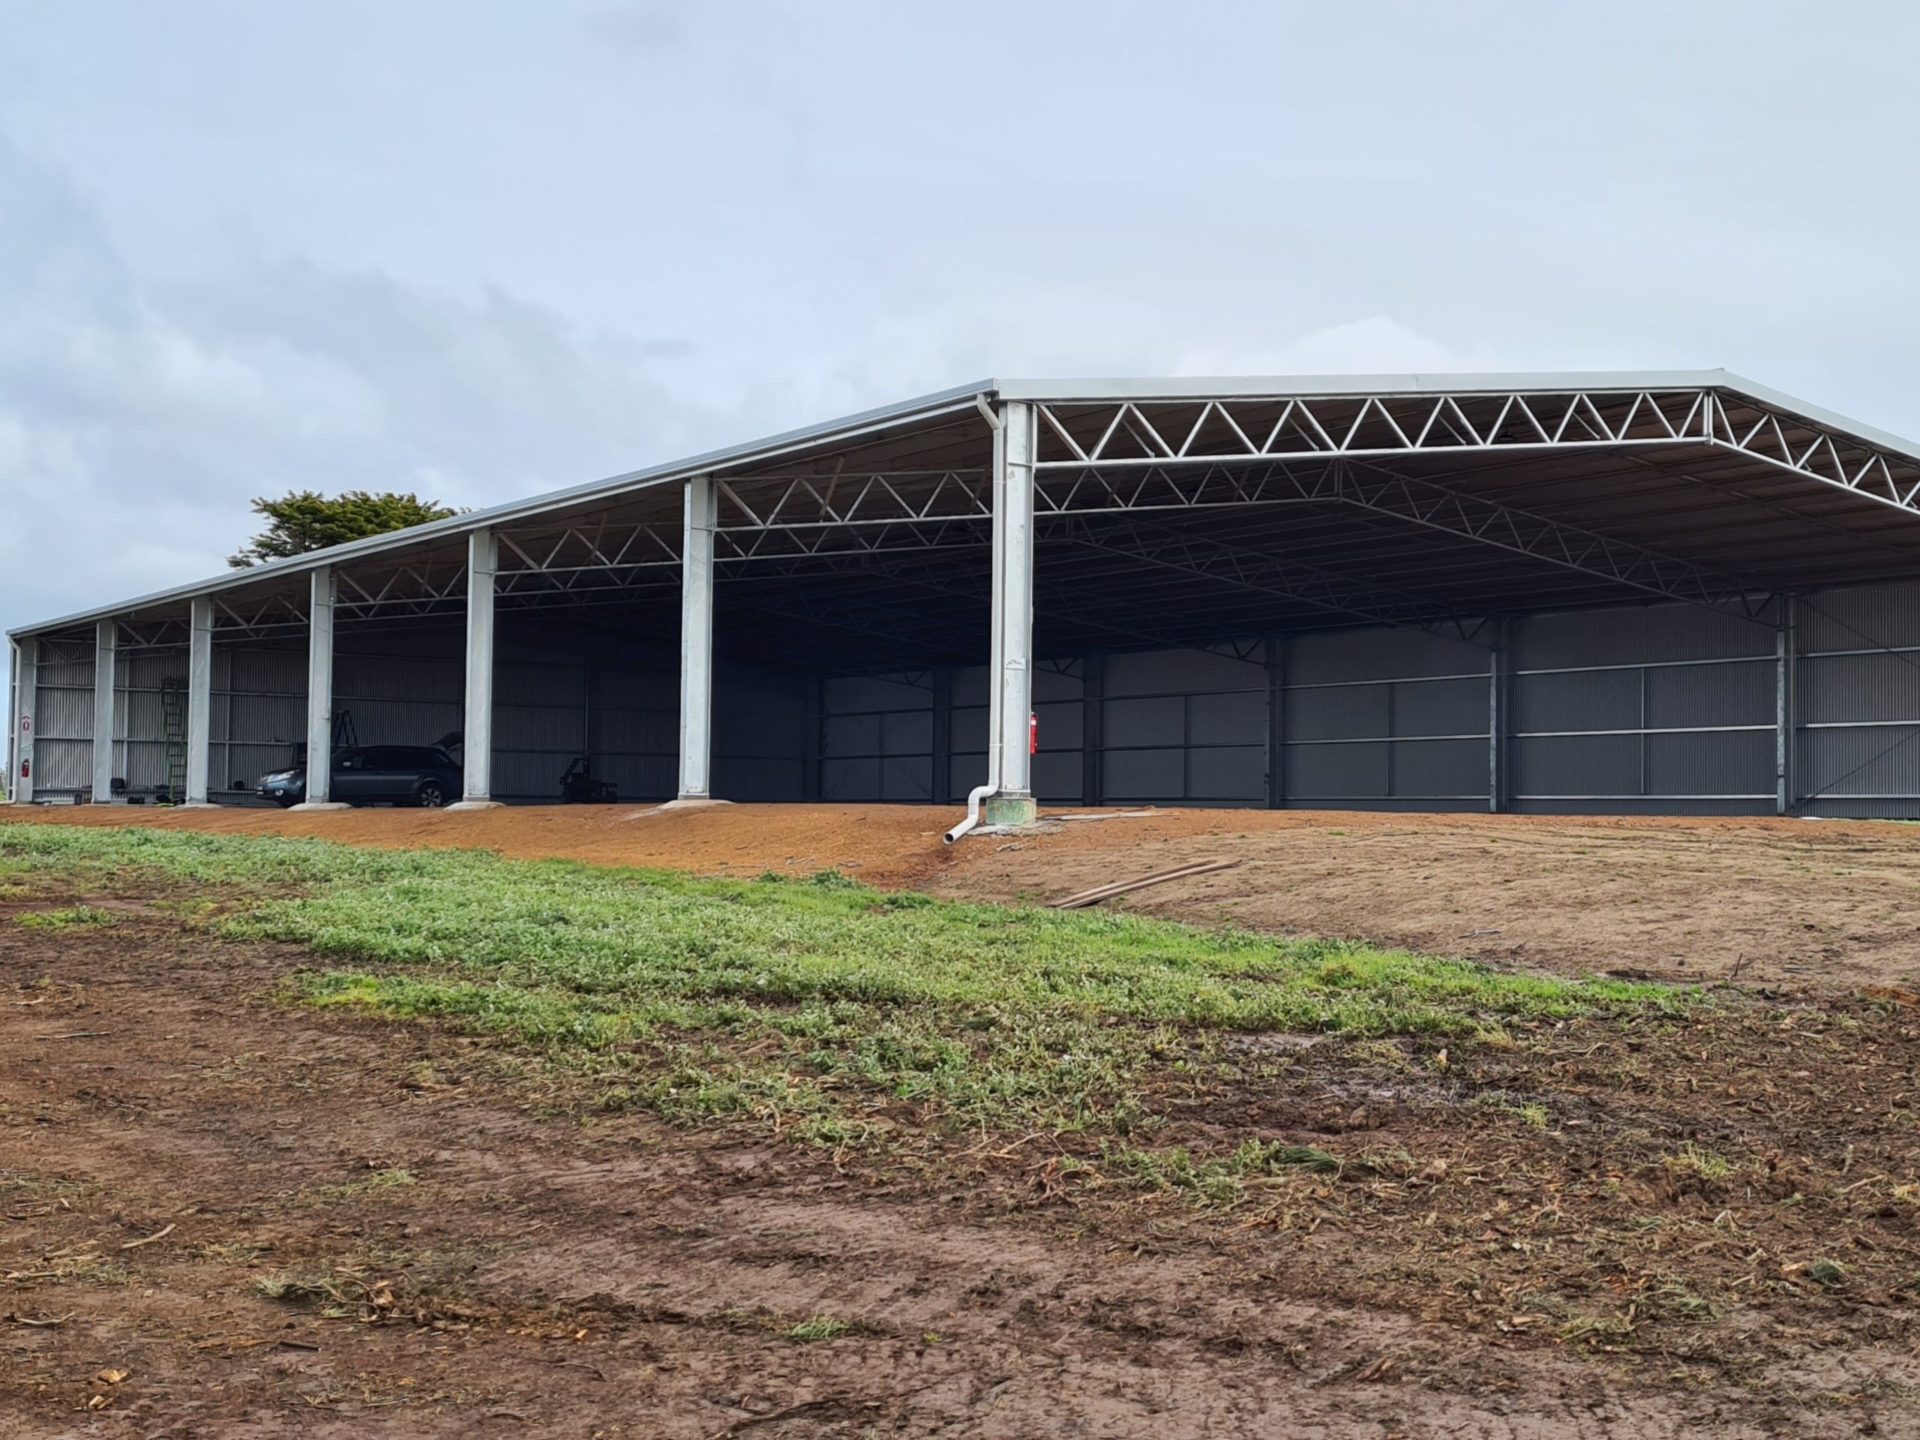 You are currently viewing 50m x 24m x 4.5m horse yard cover